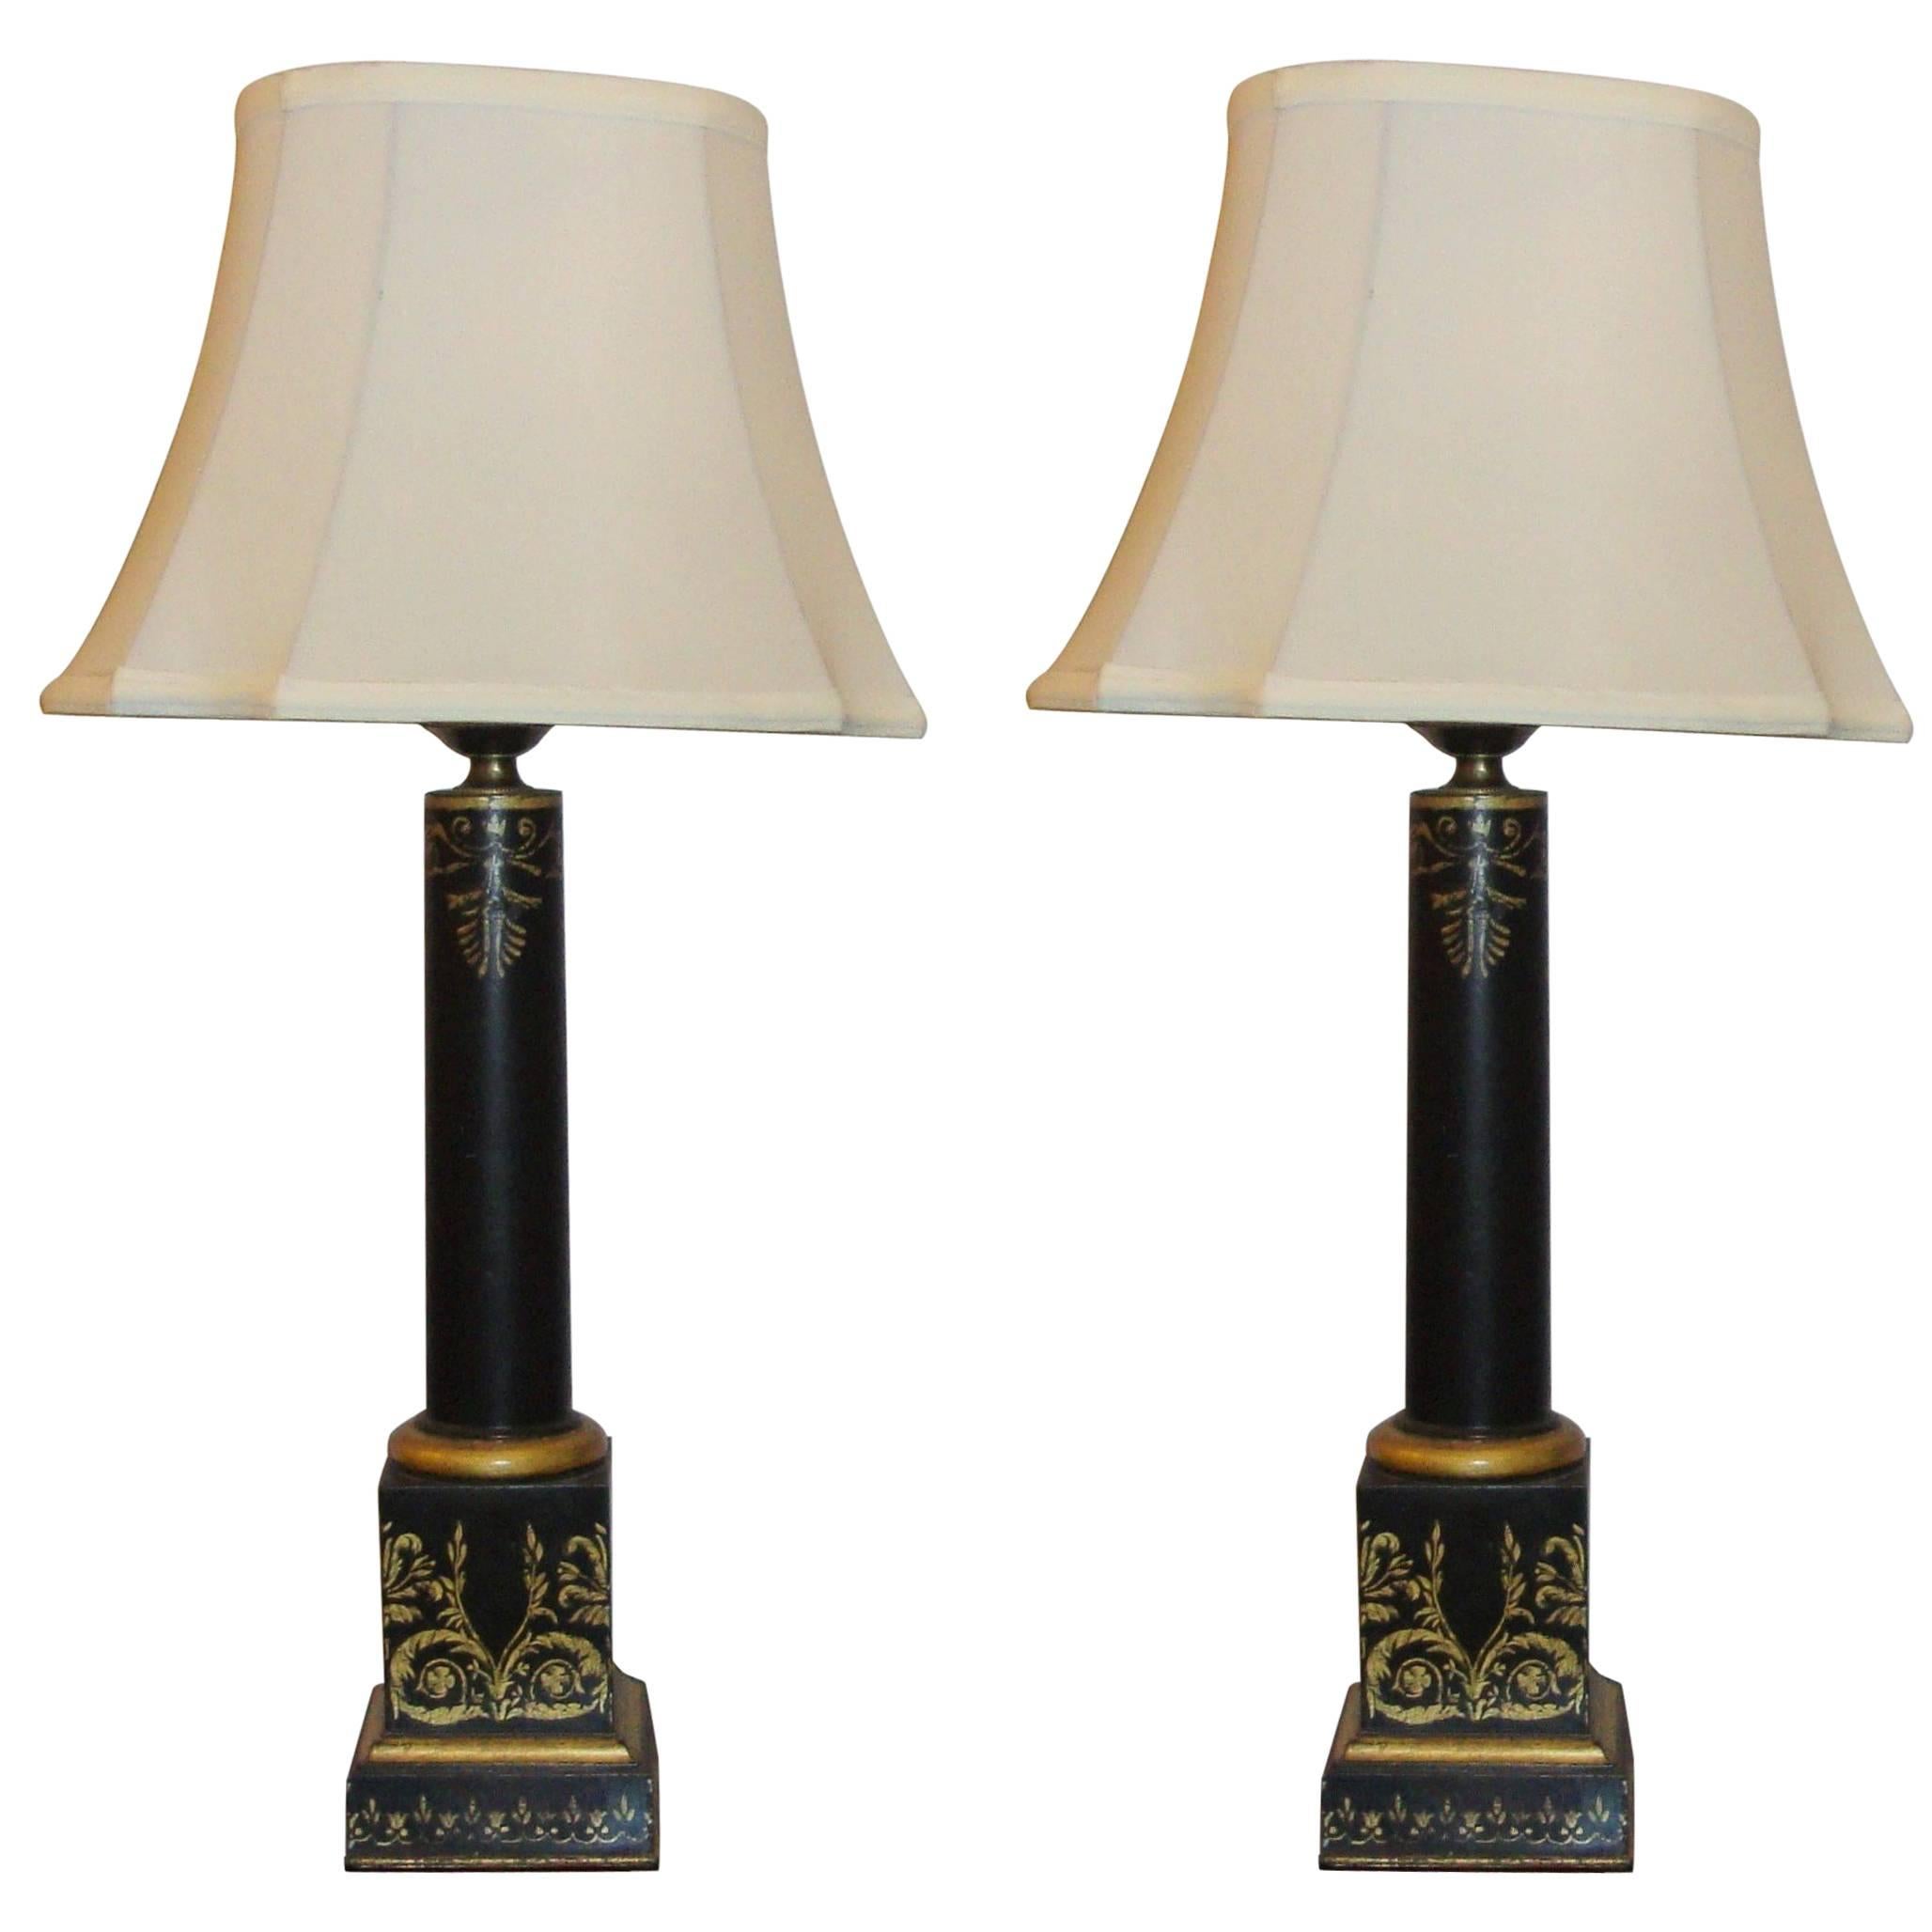 Pair of Antique Tole Painted Ebonized and Gilt Decorated Empire Style Lamps